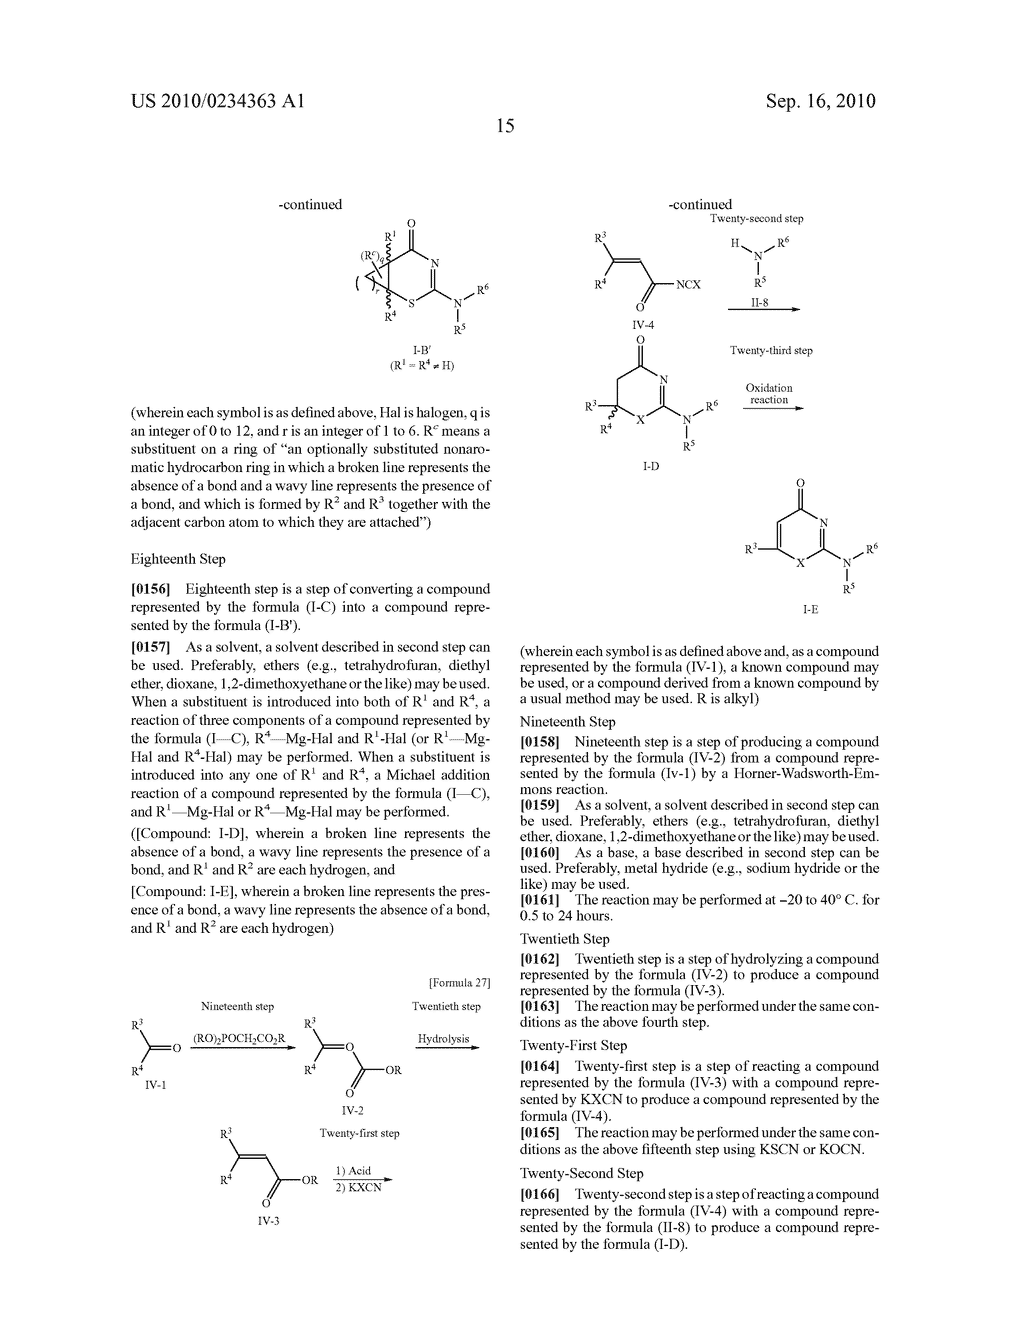 HETEROCYCLIC DERIVATIVE HAVING INHIBITORY ACTIVITY ON TYPE-I 11 DATA-HYDROXYSTEROID DEHYDROGENASE - diagram, schematic, and image 16